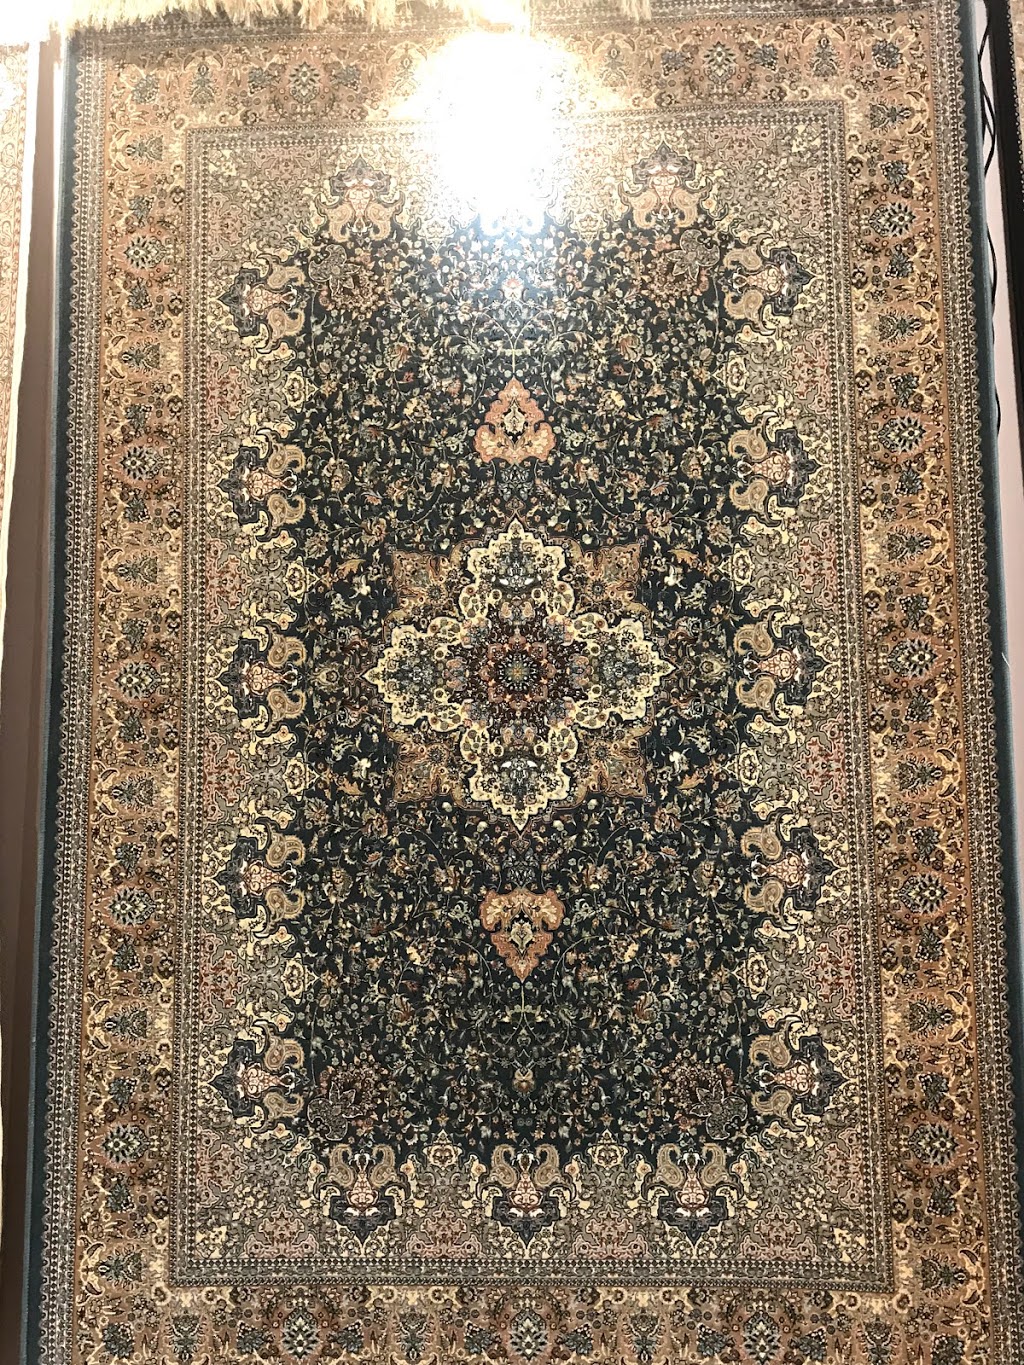 Abnoos Persian Rug | store | Shop 21/930 Old Northern Rd, Glenorie NSW 2157, Australia | 0296522291 OR +61 2 9652 2291